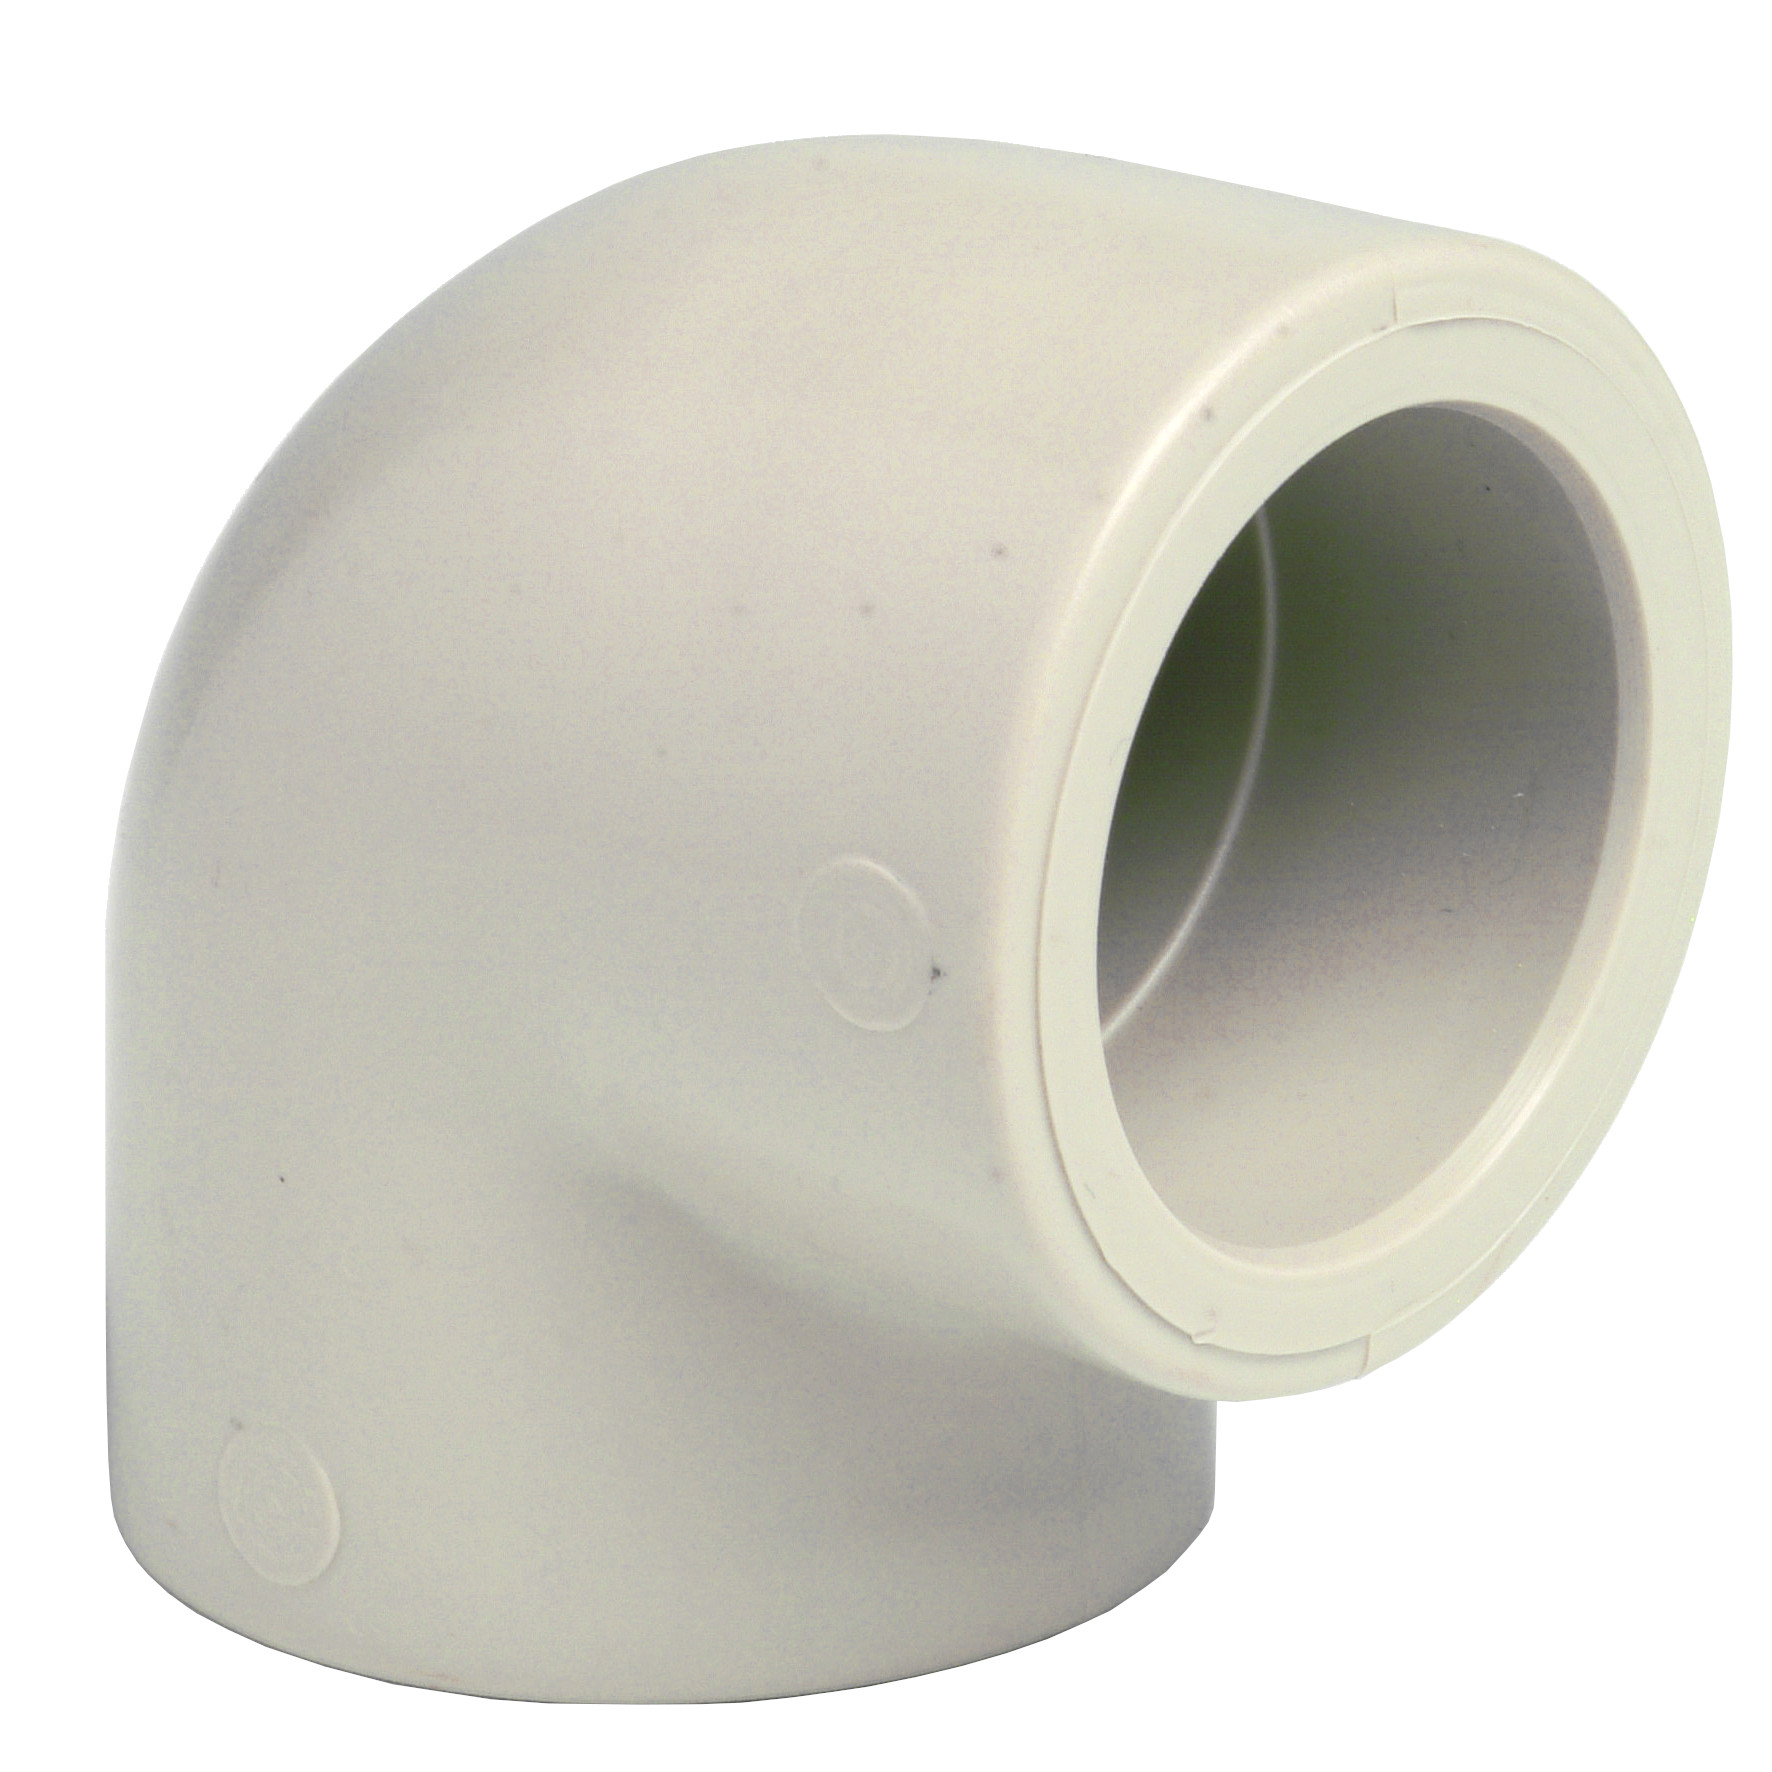 PP-H elbow 90° - EFFAST - 100% Made in Italy